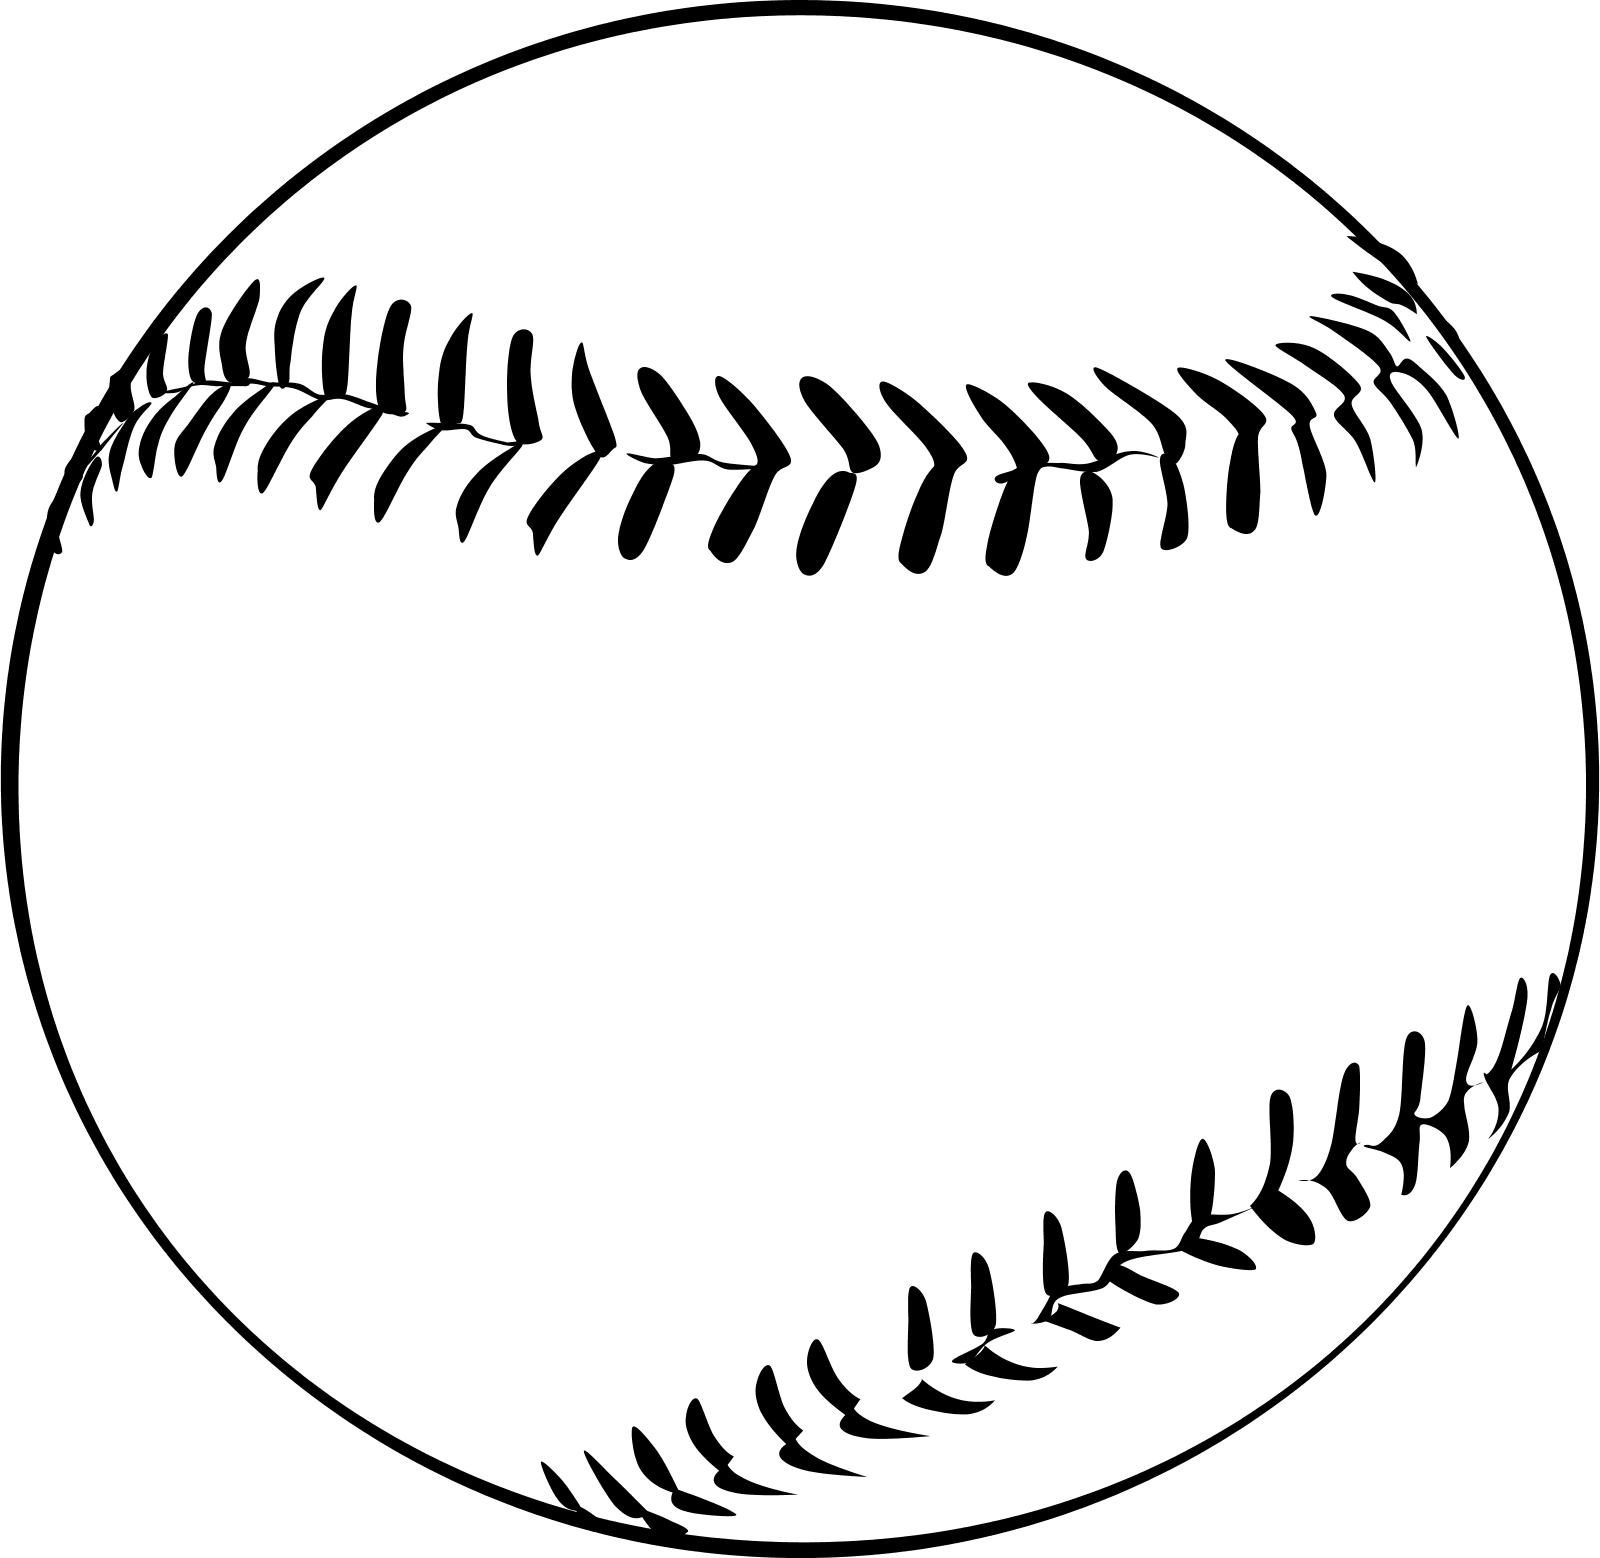 Images Of A Baseball